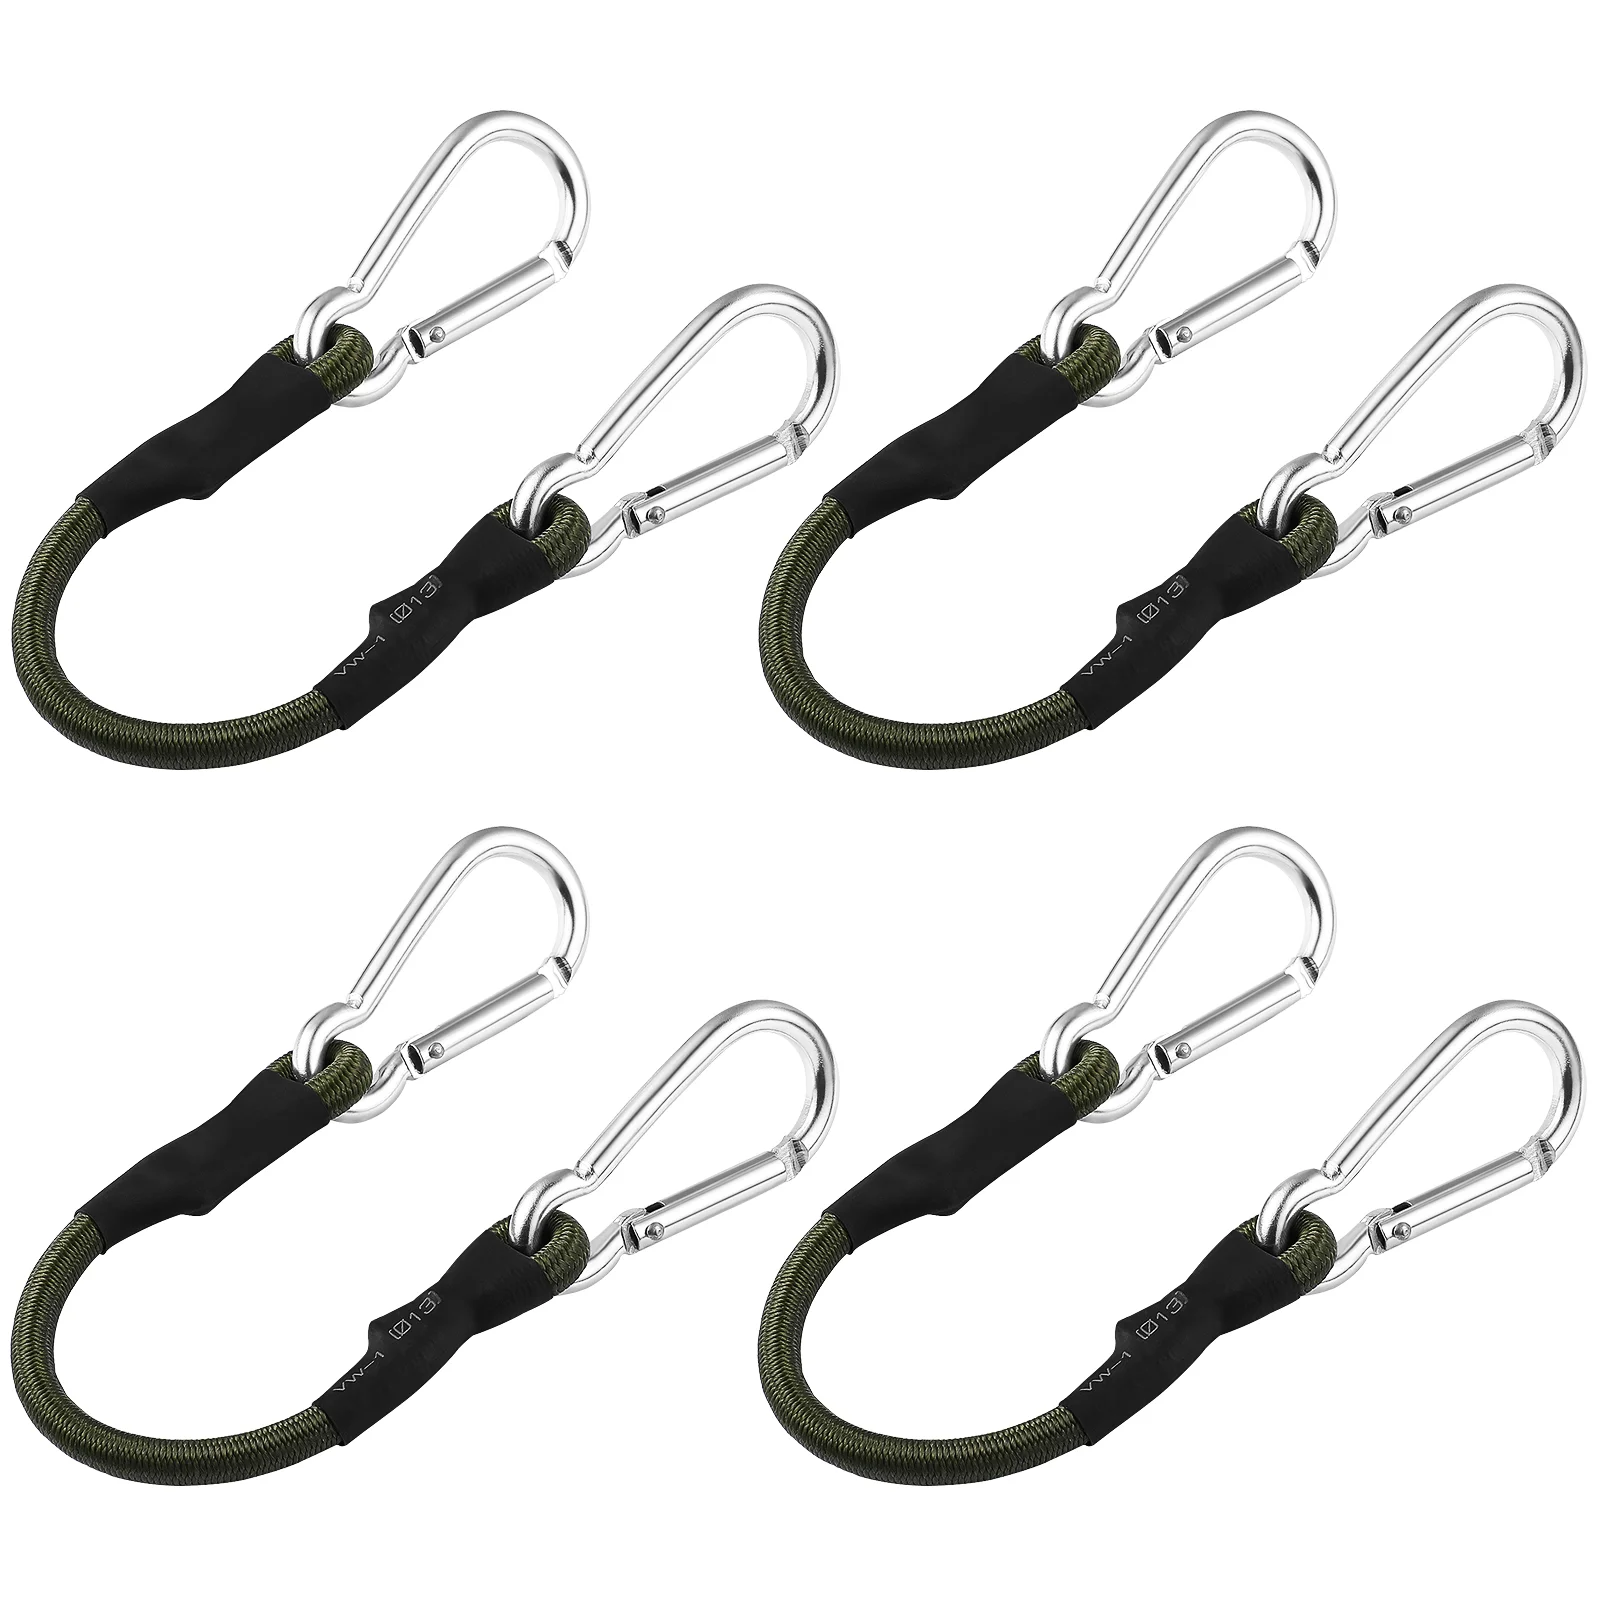 4pcs Carabiner Hook Bungee Cords Heavy Duty Elastic Cords Outdoor Camping Bungee Straps Elastic Luggage Tie Downs